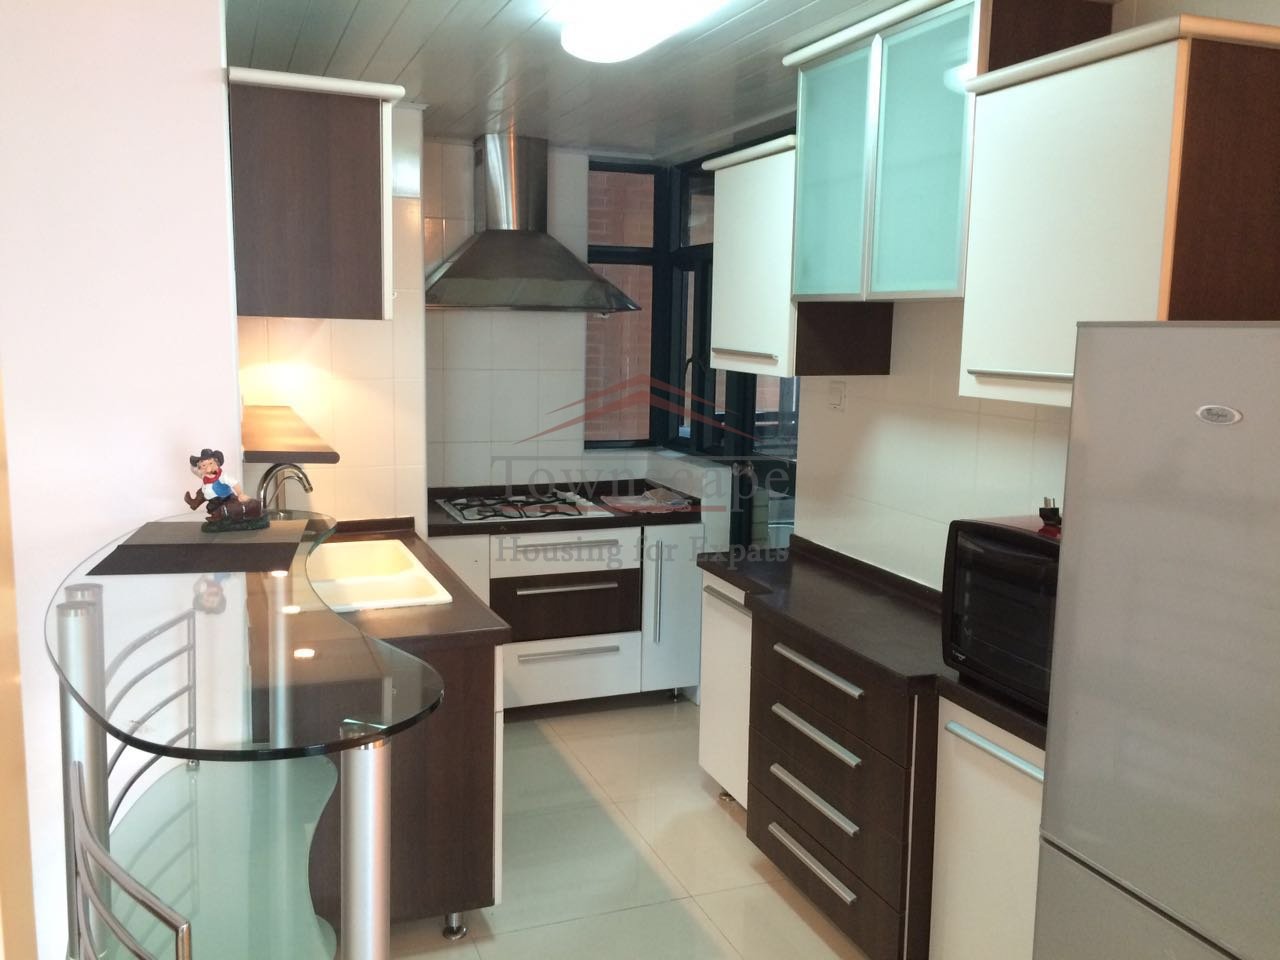  Excellent 2 bedroom Apt. in Shanghai French Concession